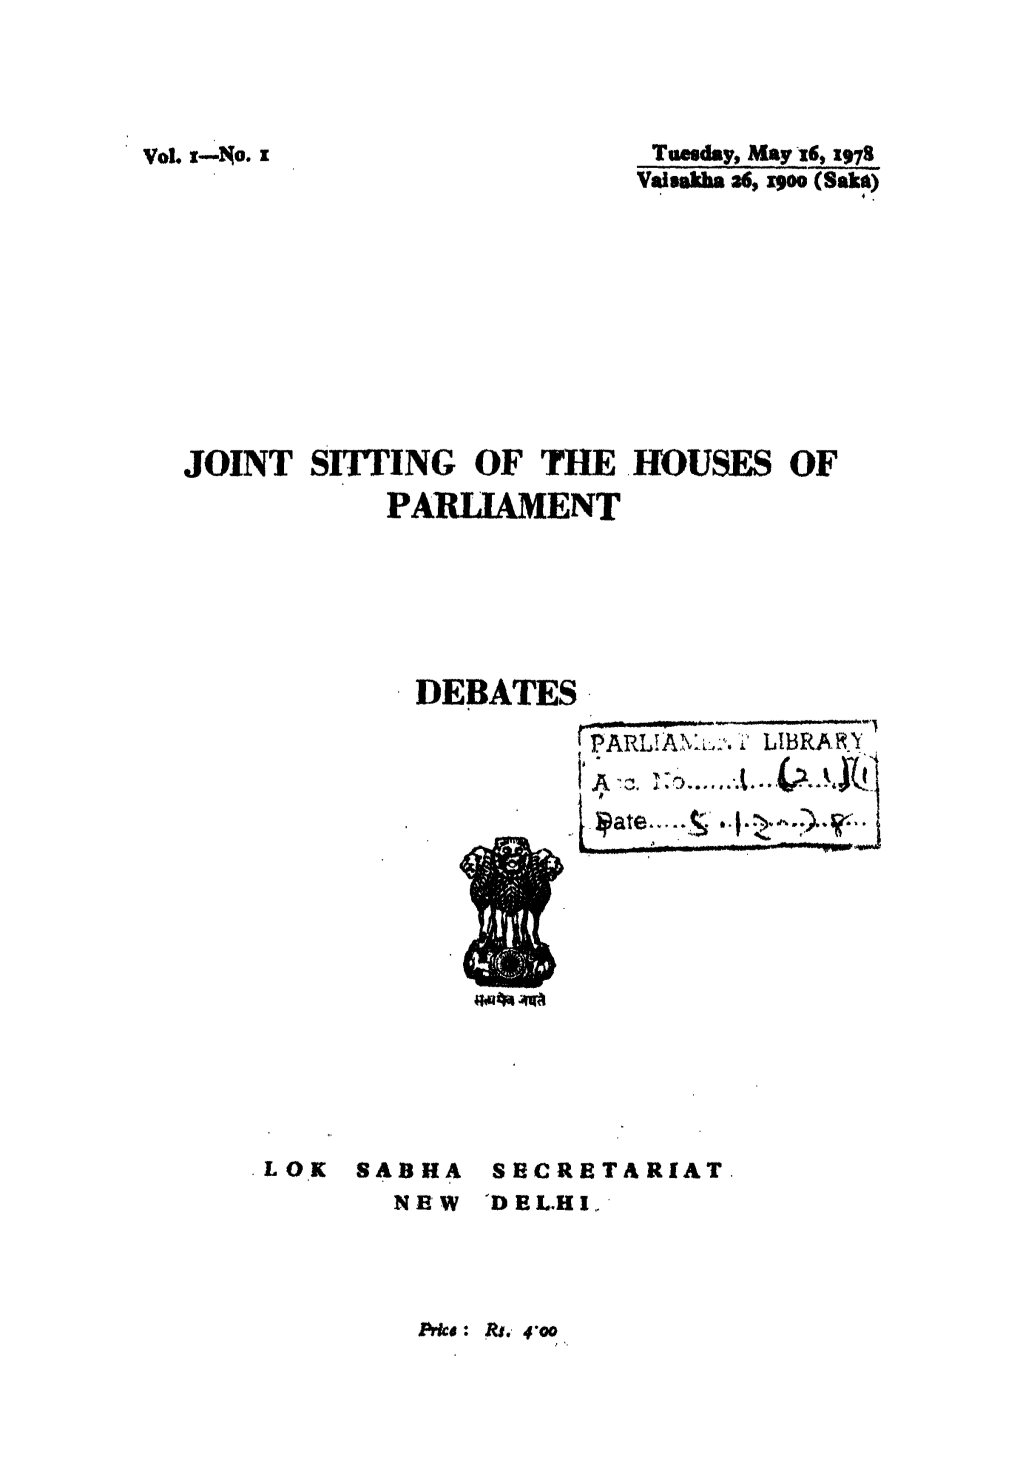 Joint Sitting of the Houses of Parliament Debates